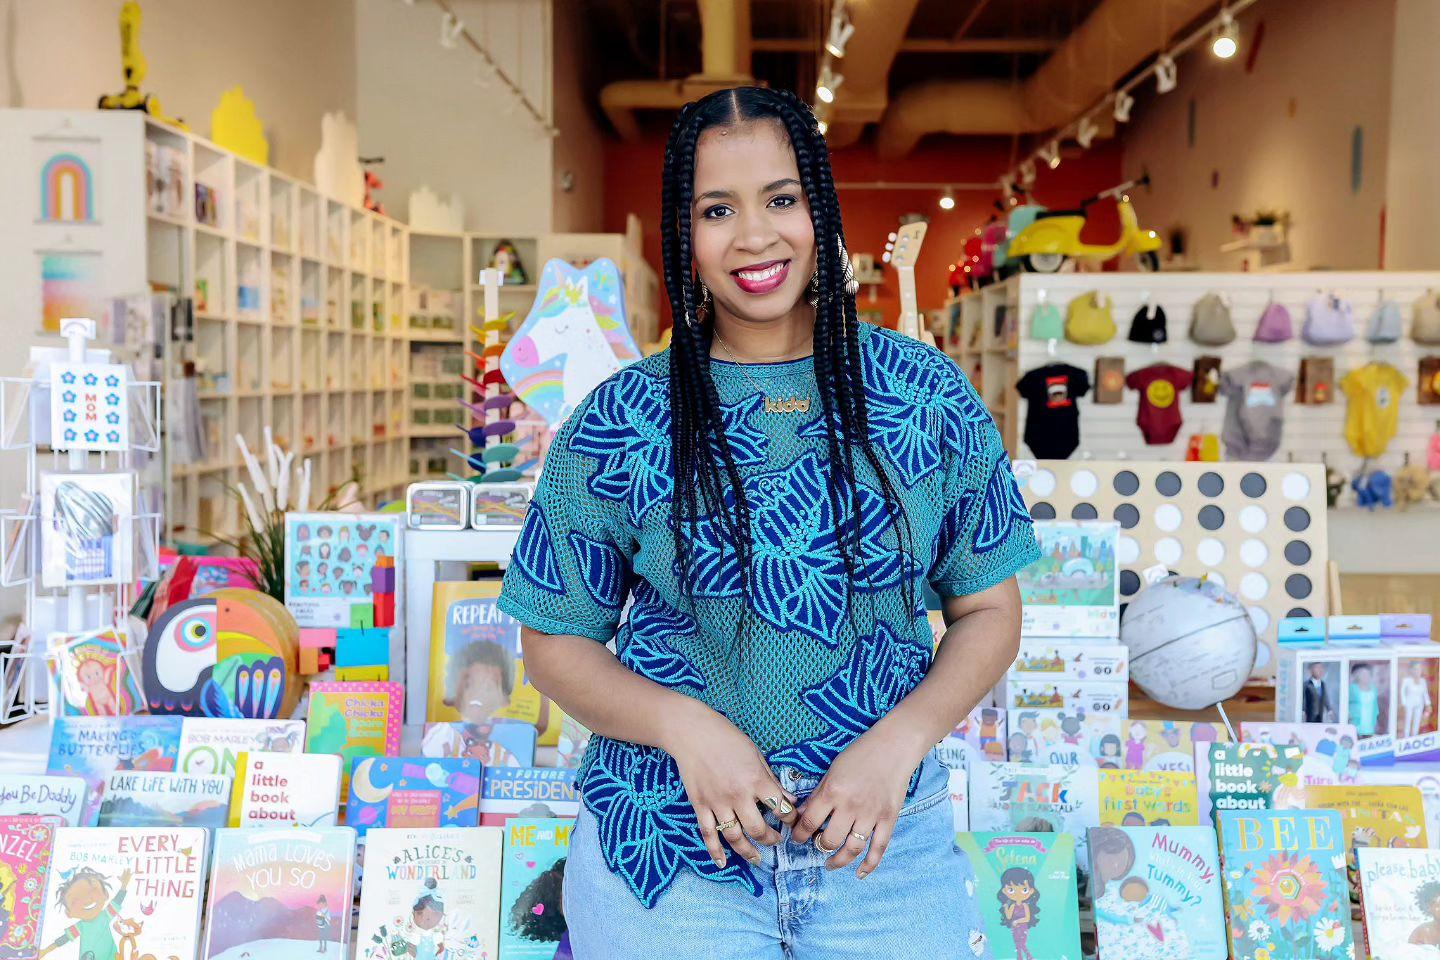 A Black woman poses in front of a display of books in a store, with various clothing and toys in the background.